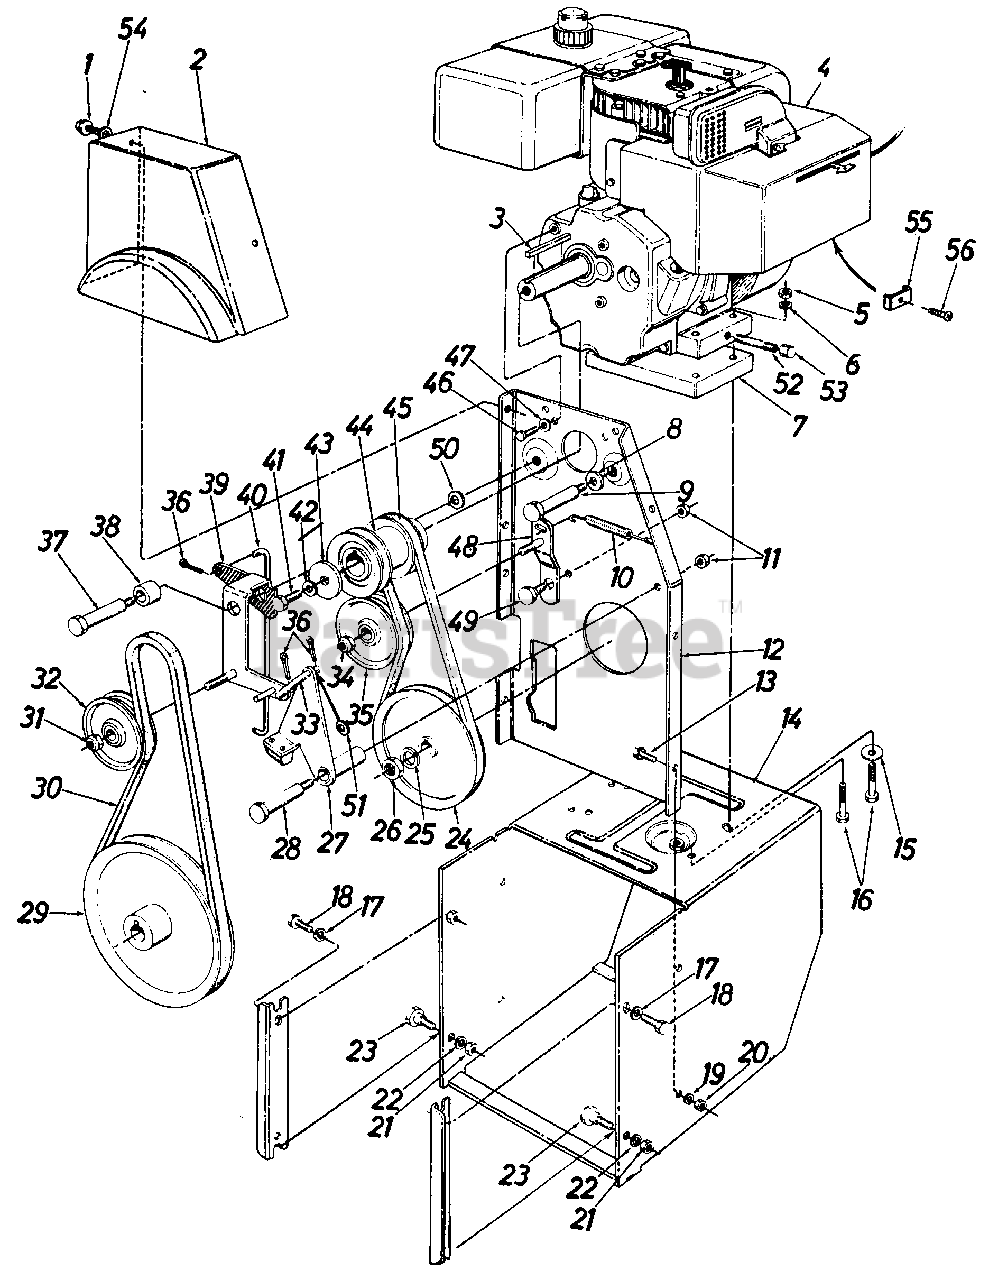 MTD 31800S - MTD Snow Thrower (1985) Snow Parts Lookup with Diagrams